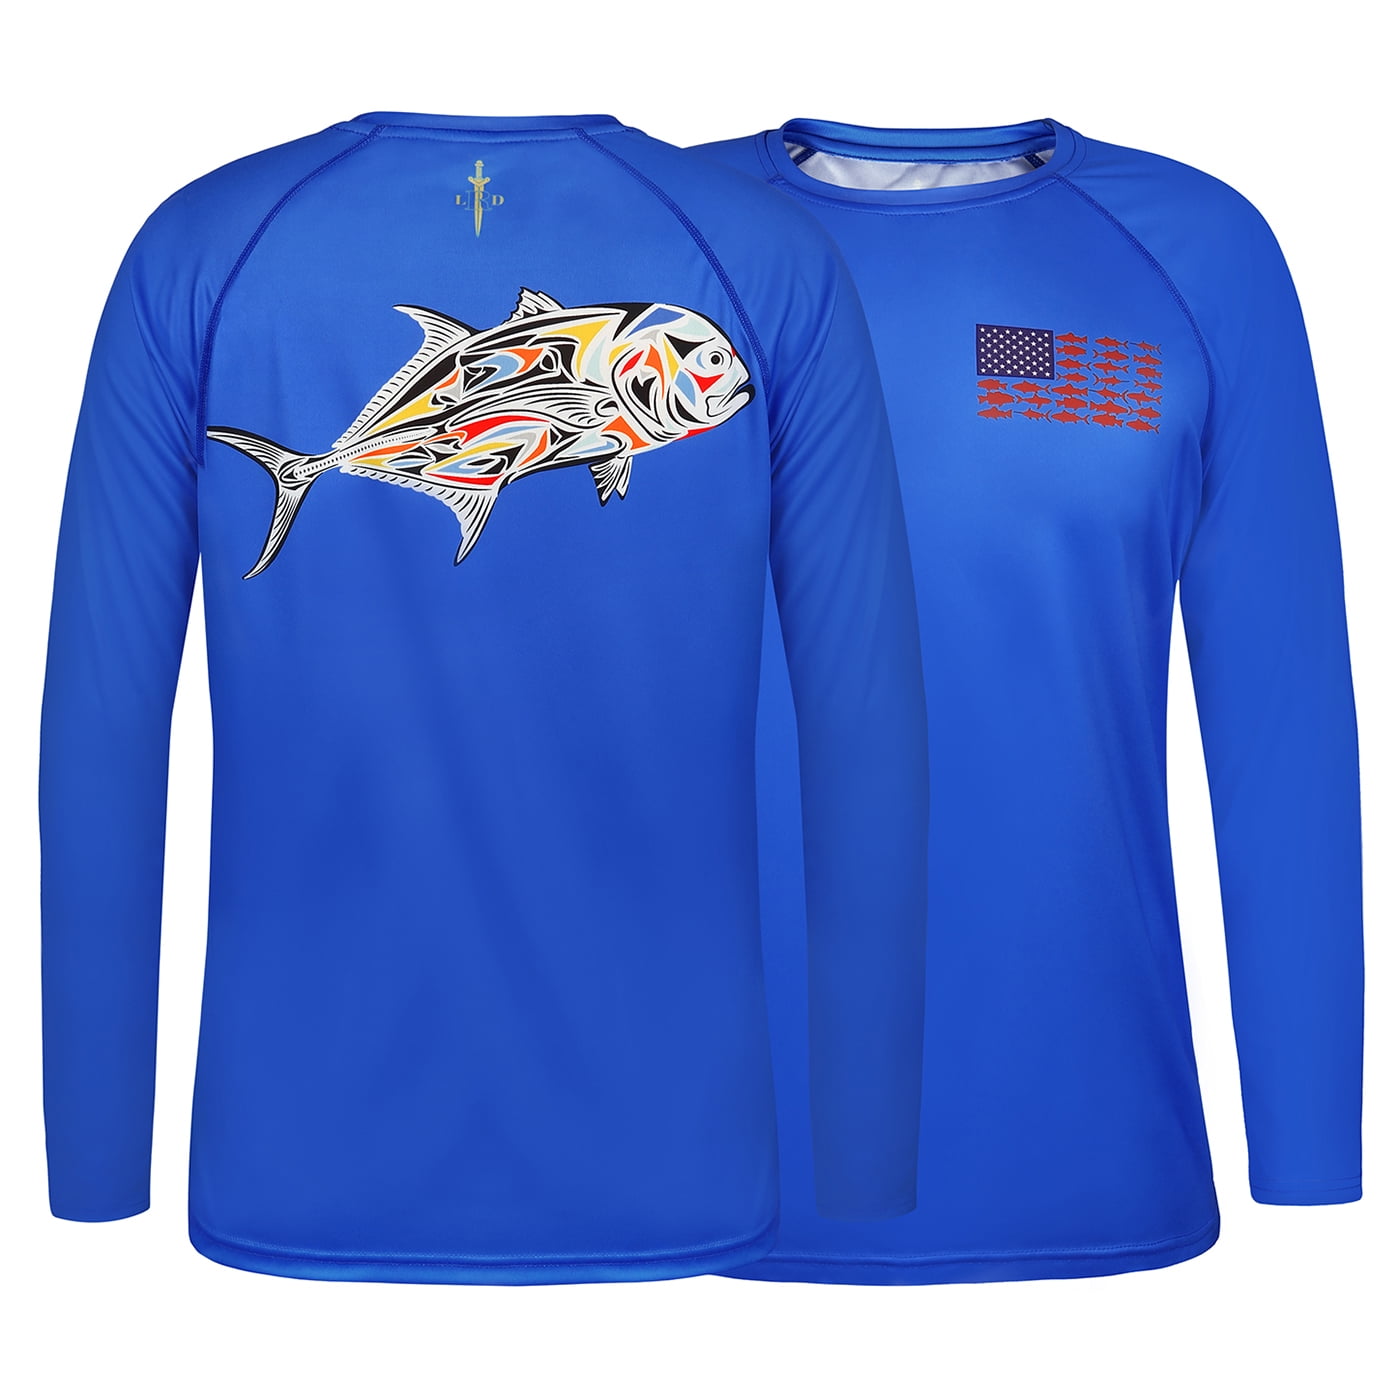 Buy gng fishing shirts - OFF-50% > Free Delivery